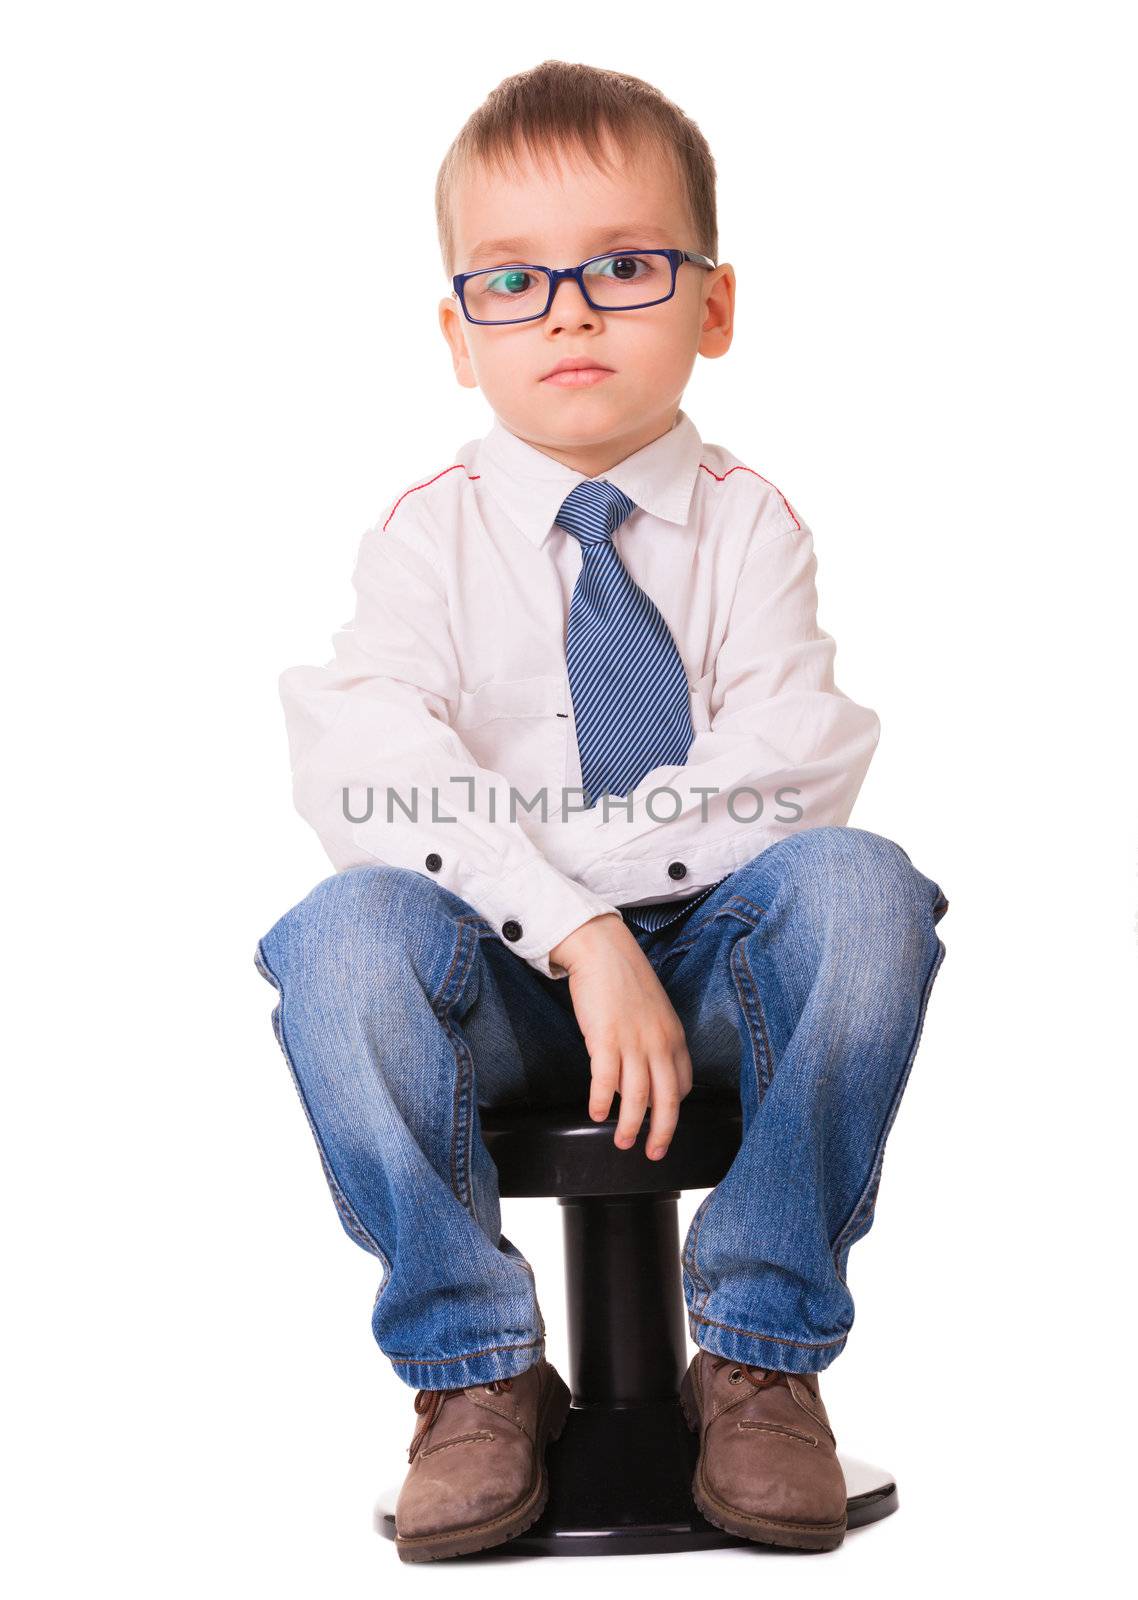  Small sad boy in glasses, shirt and jeans sitting on the black chair. Isolated on white background. 